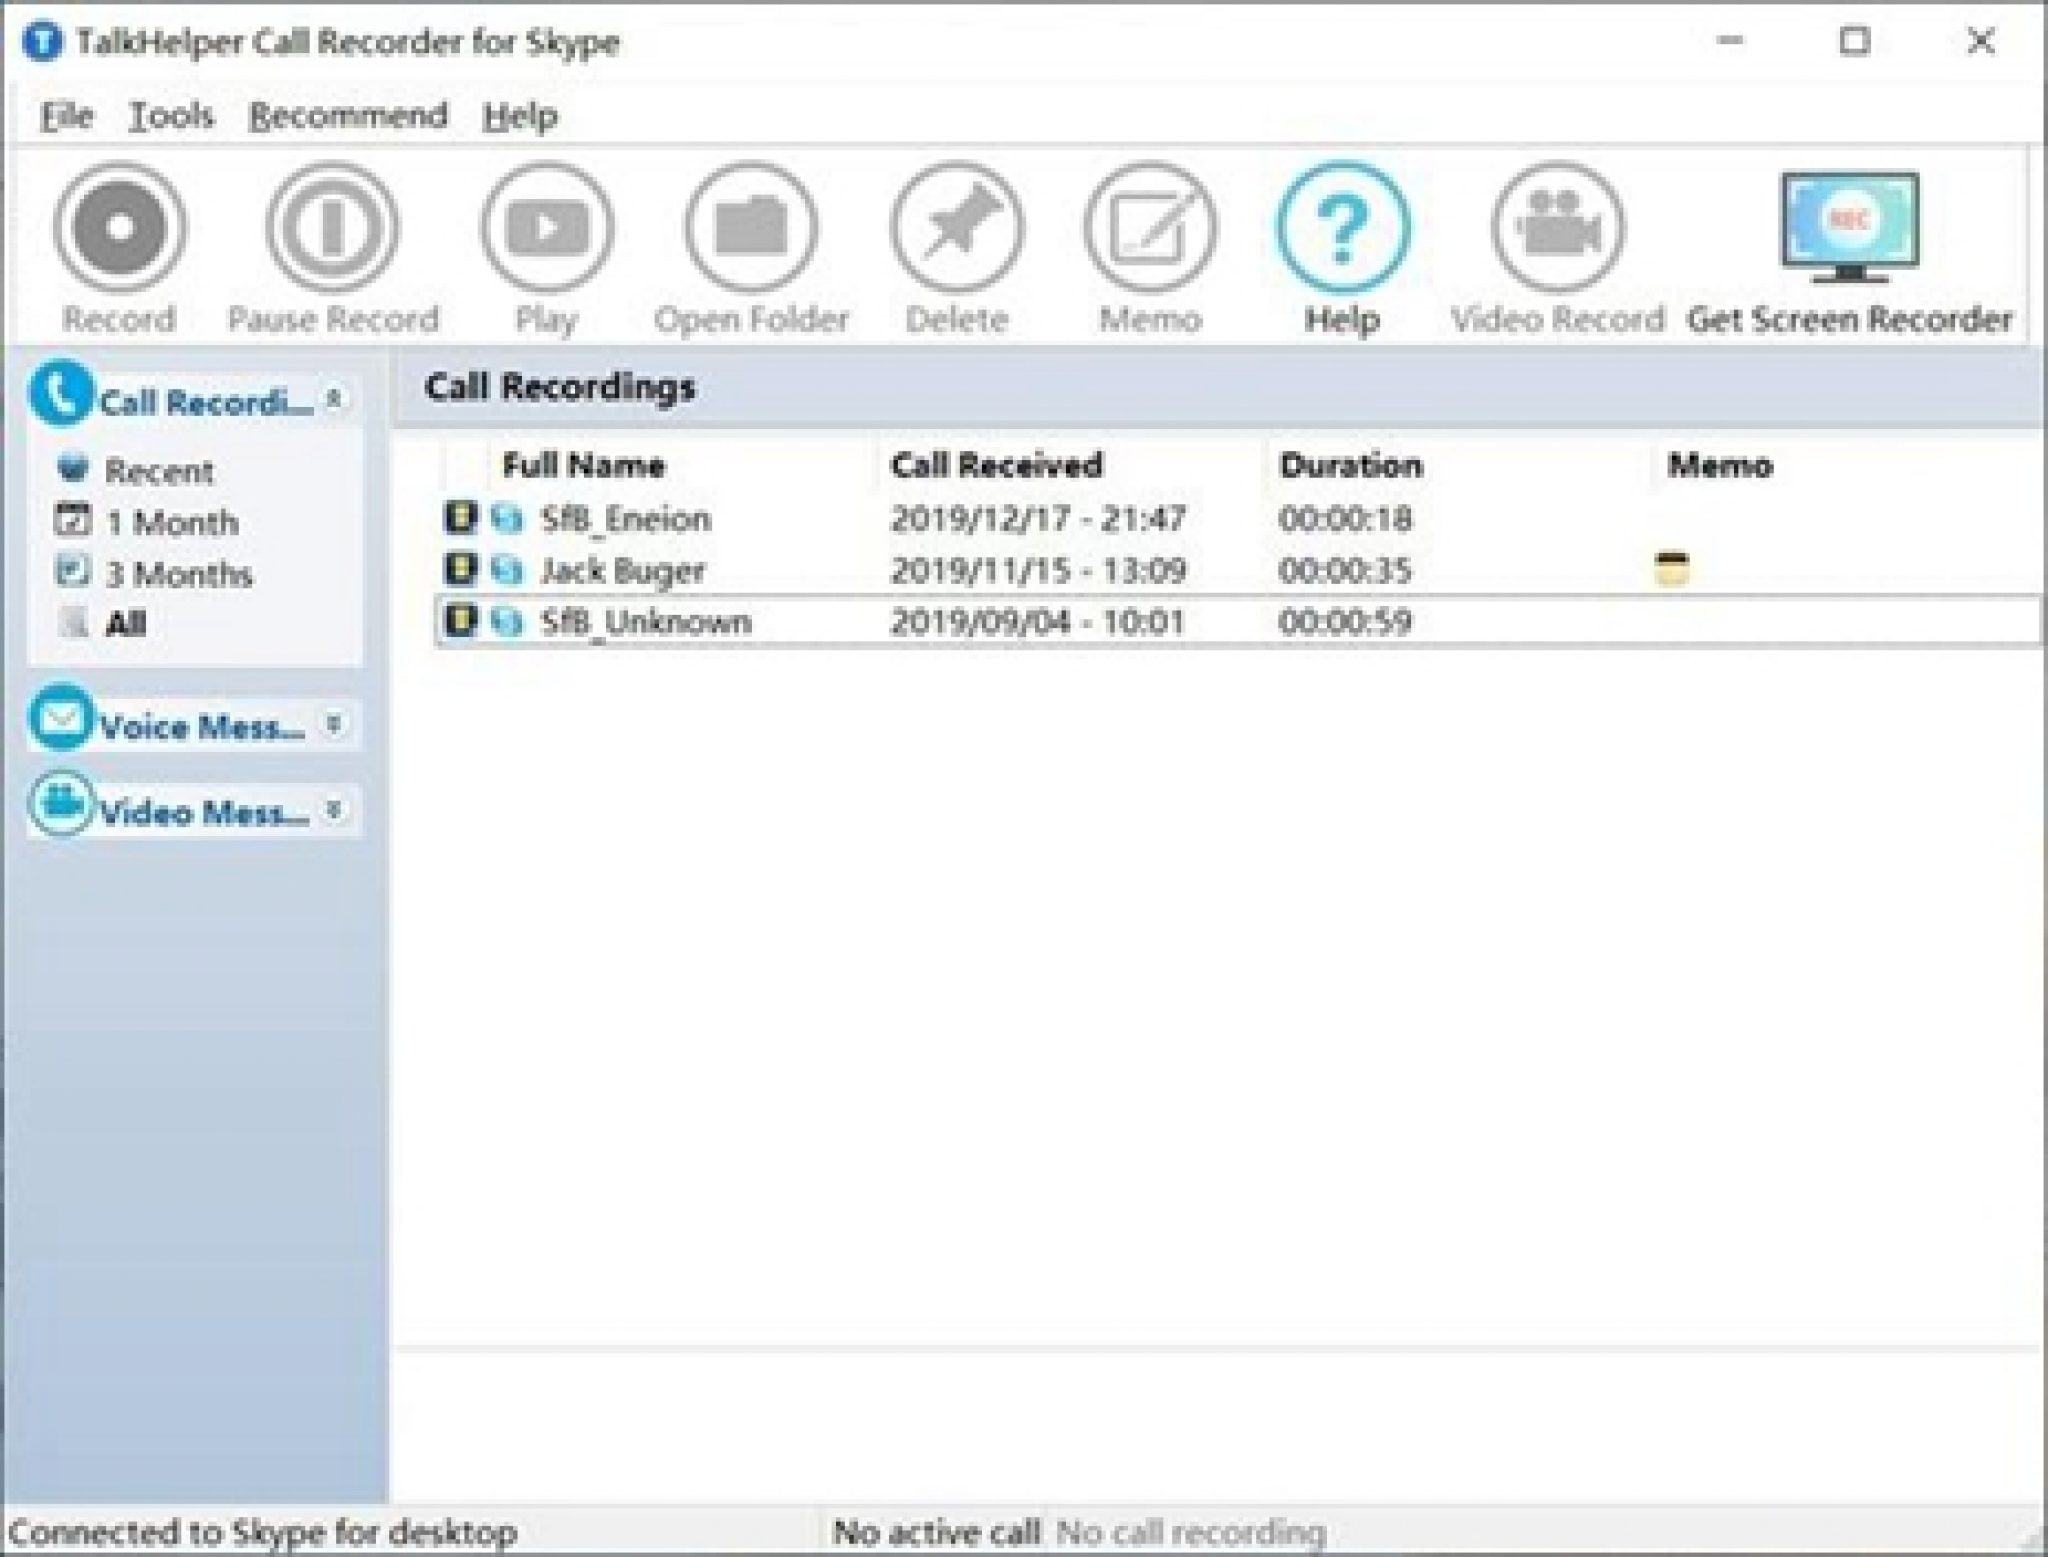 for mac instal Amolto Call Recorder for Skype 3.26.1